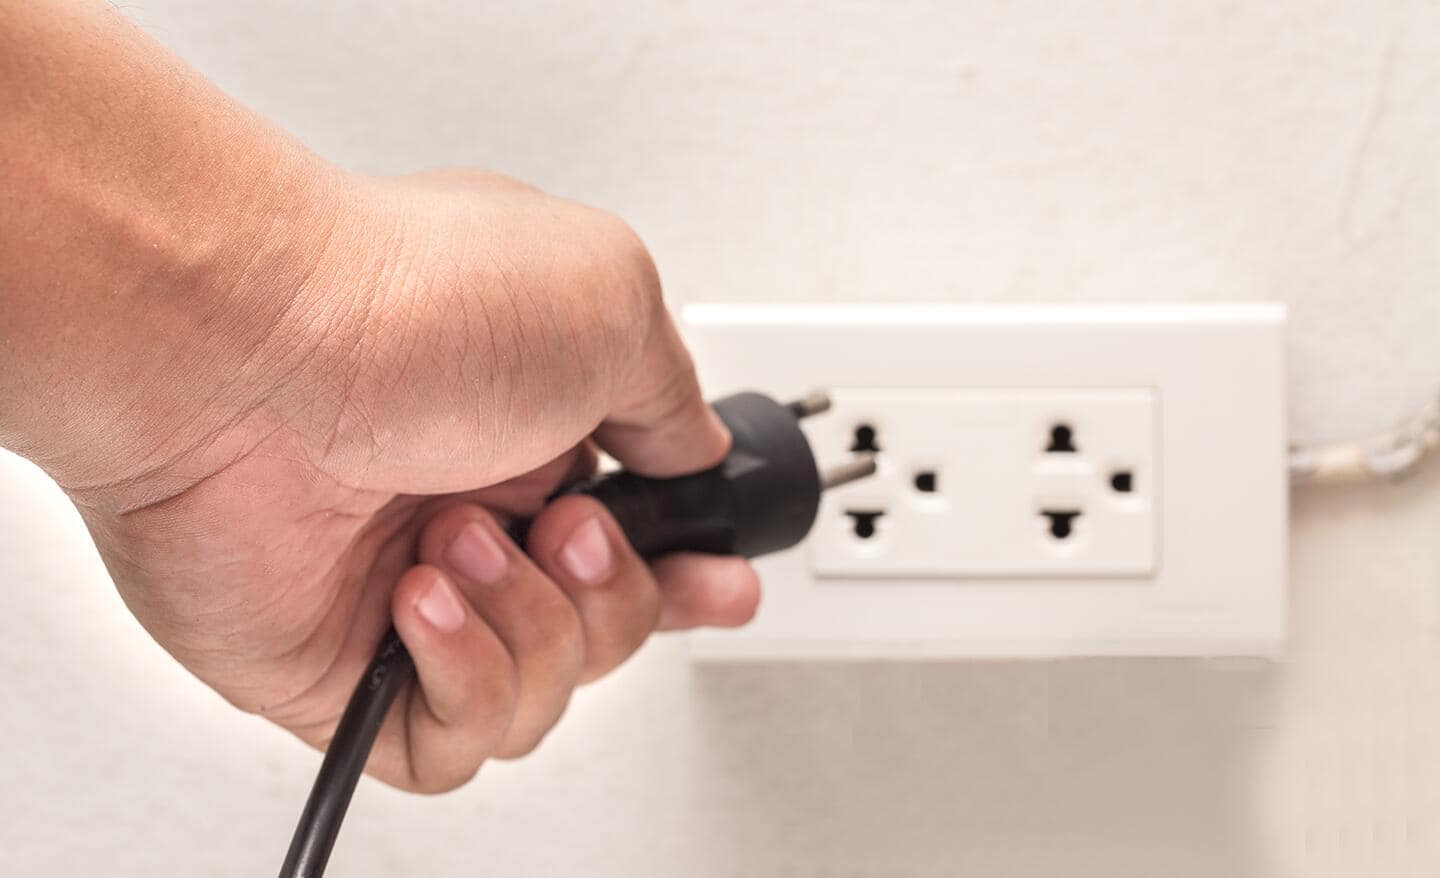 A person unplugs a refrigerator from a wall socket.